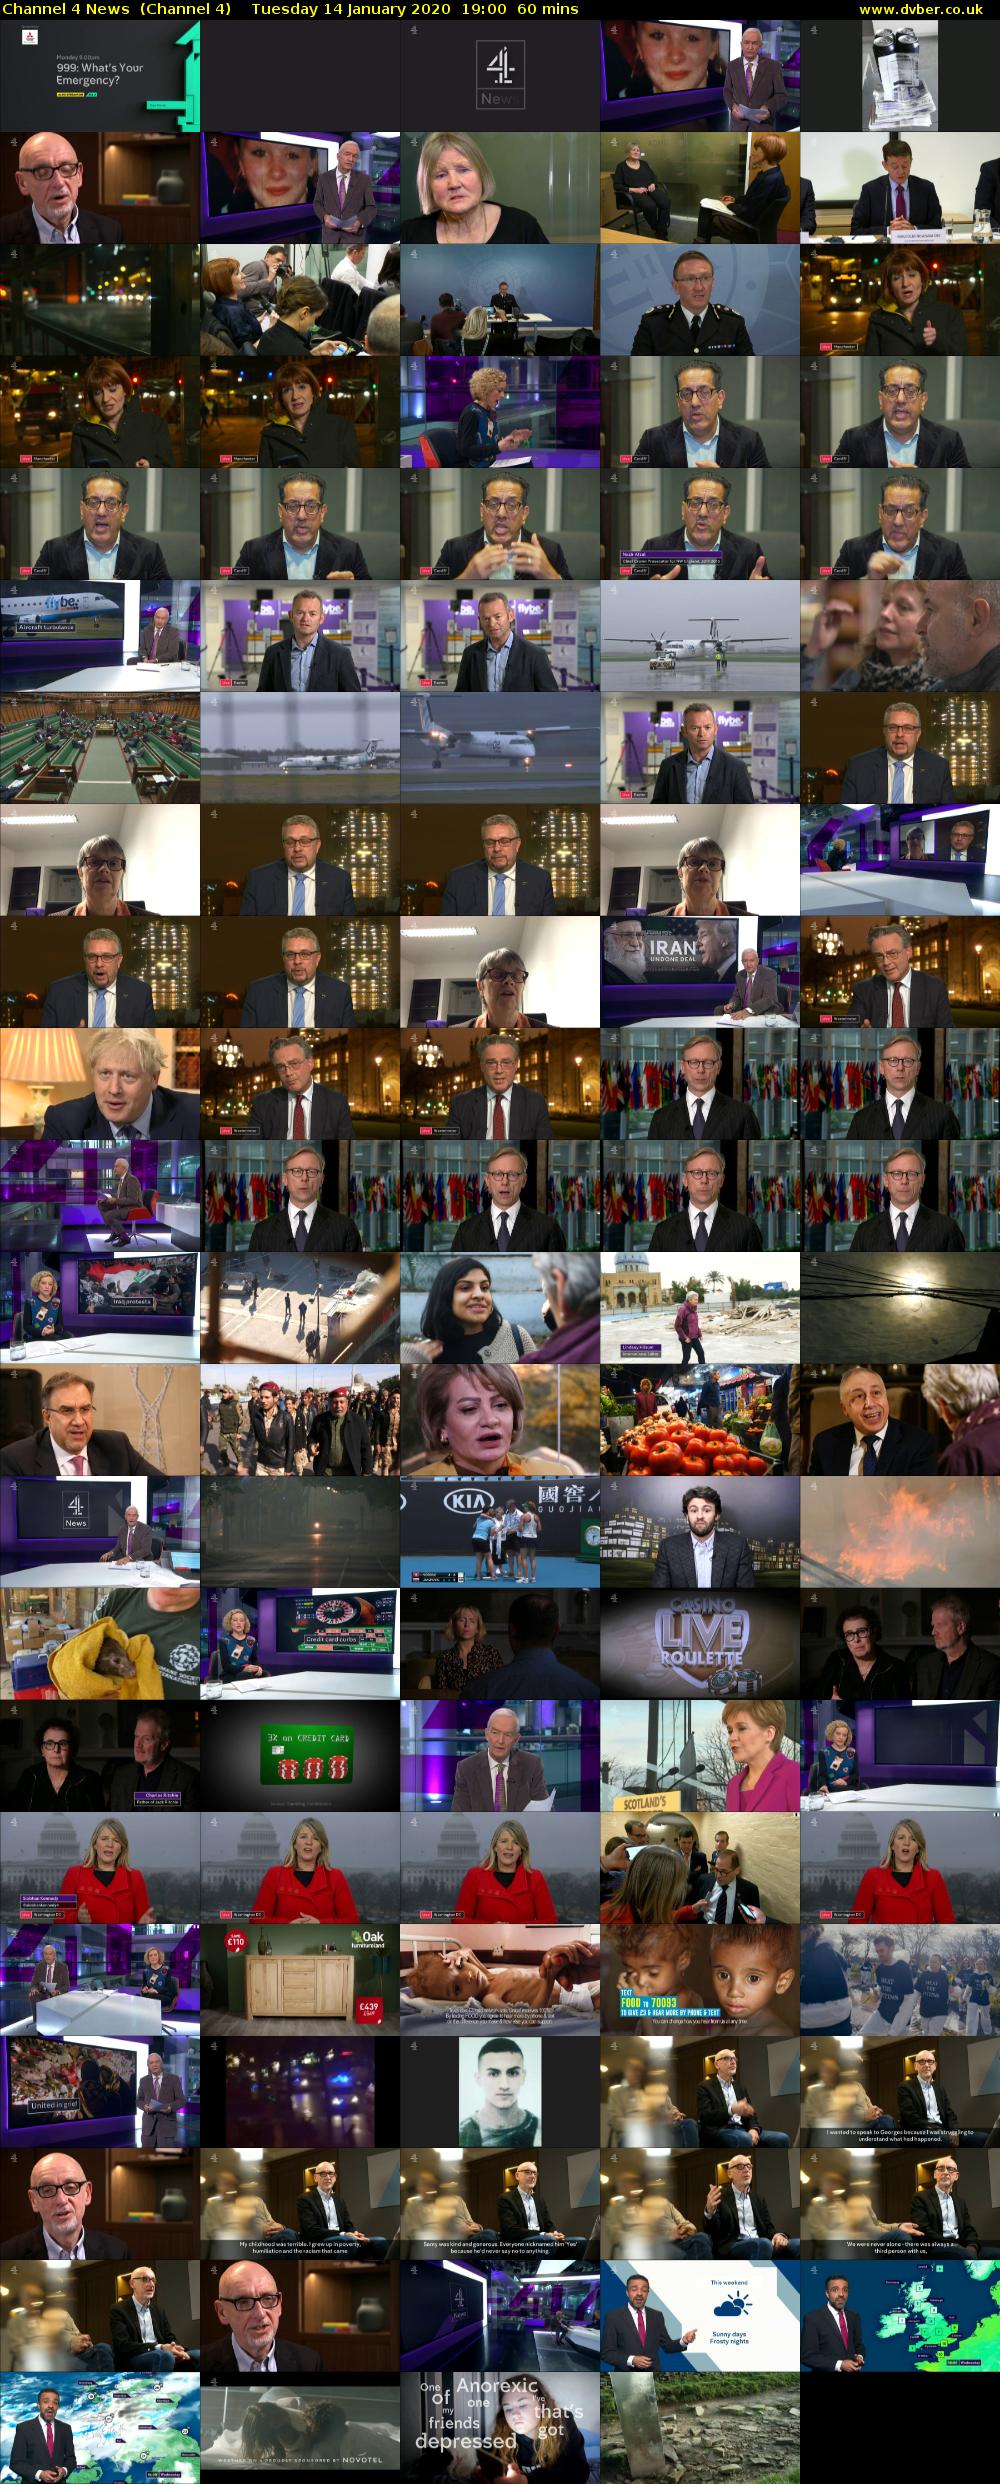 Channel 4 News  (Channel 4) Tuesday 14 January 2020 19:00 - 20:00